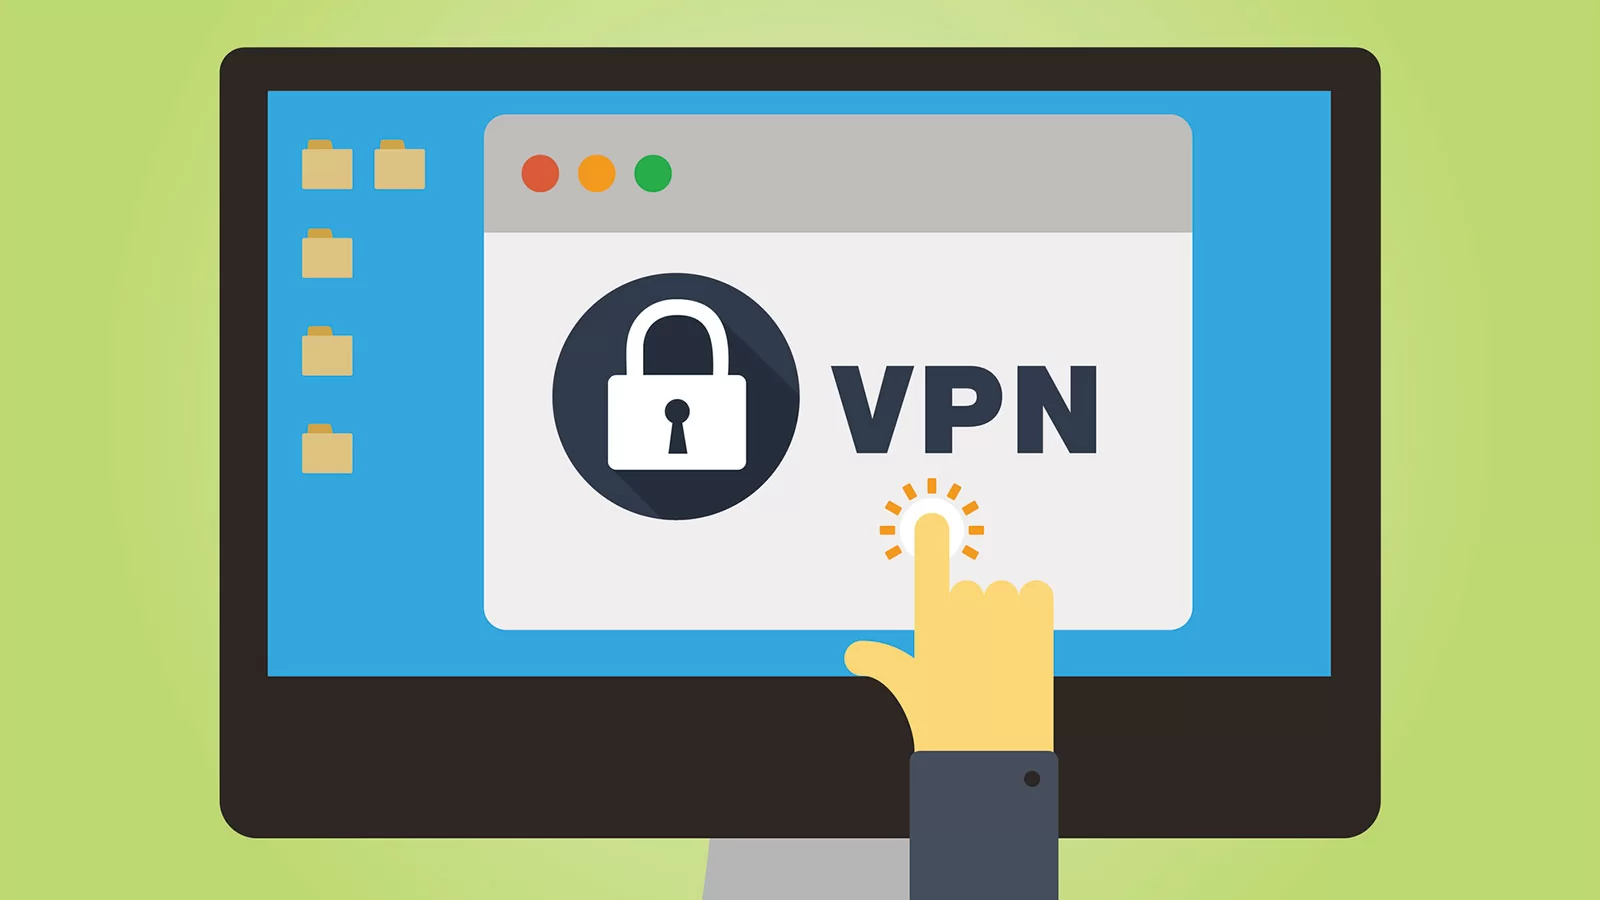 How to Use Public Internet or Wifi Safely by Using VPNs?